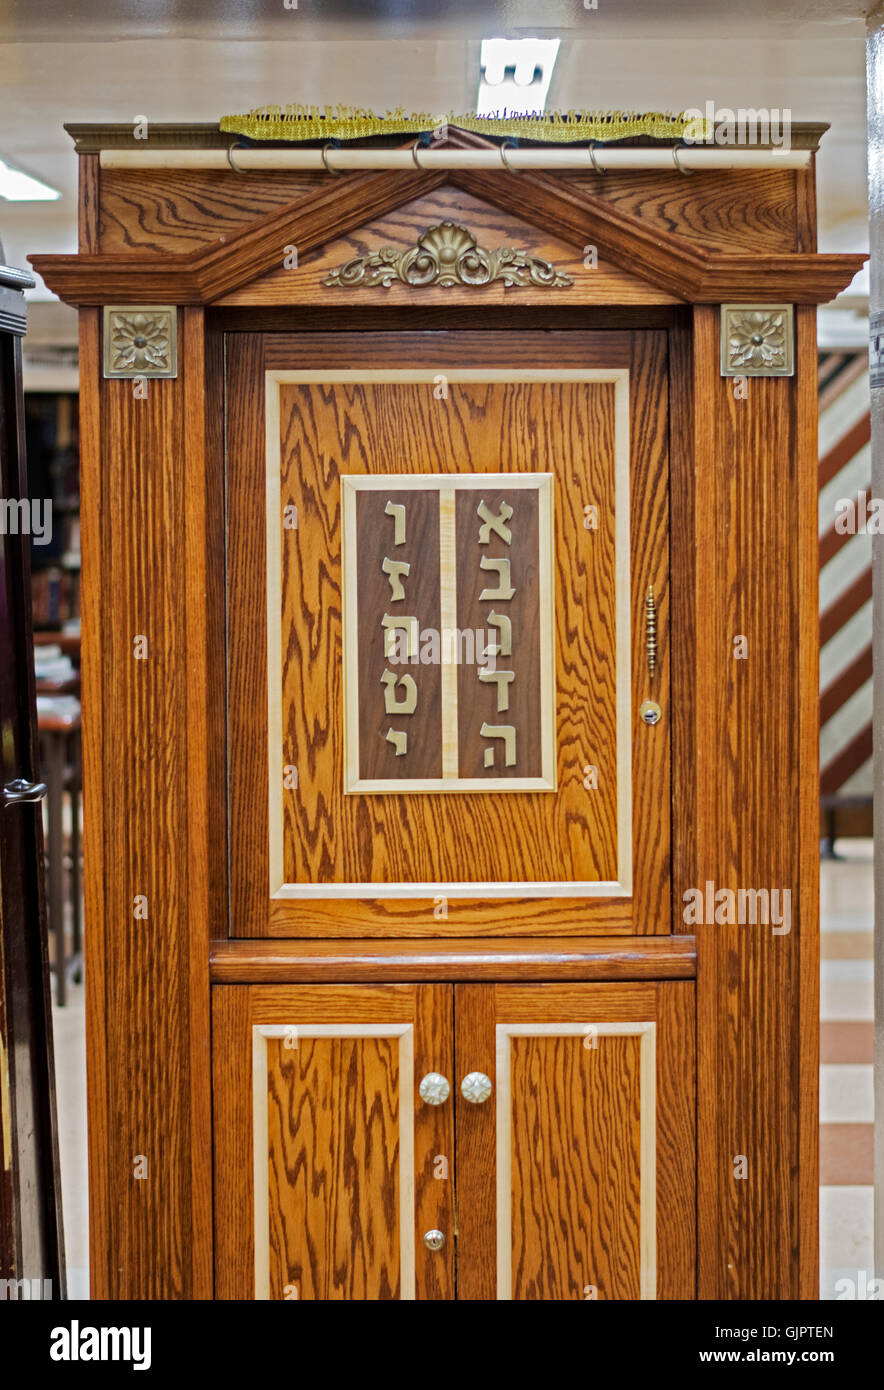 The holy ark at an orthodox Jewish synagogue in Brooklyn, uncovered on Tisha B'Av as per the custom. Stock Photo